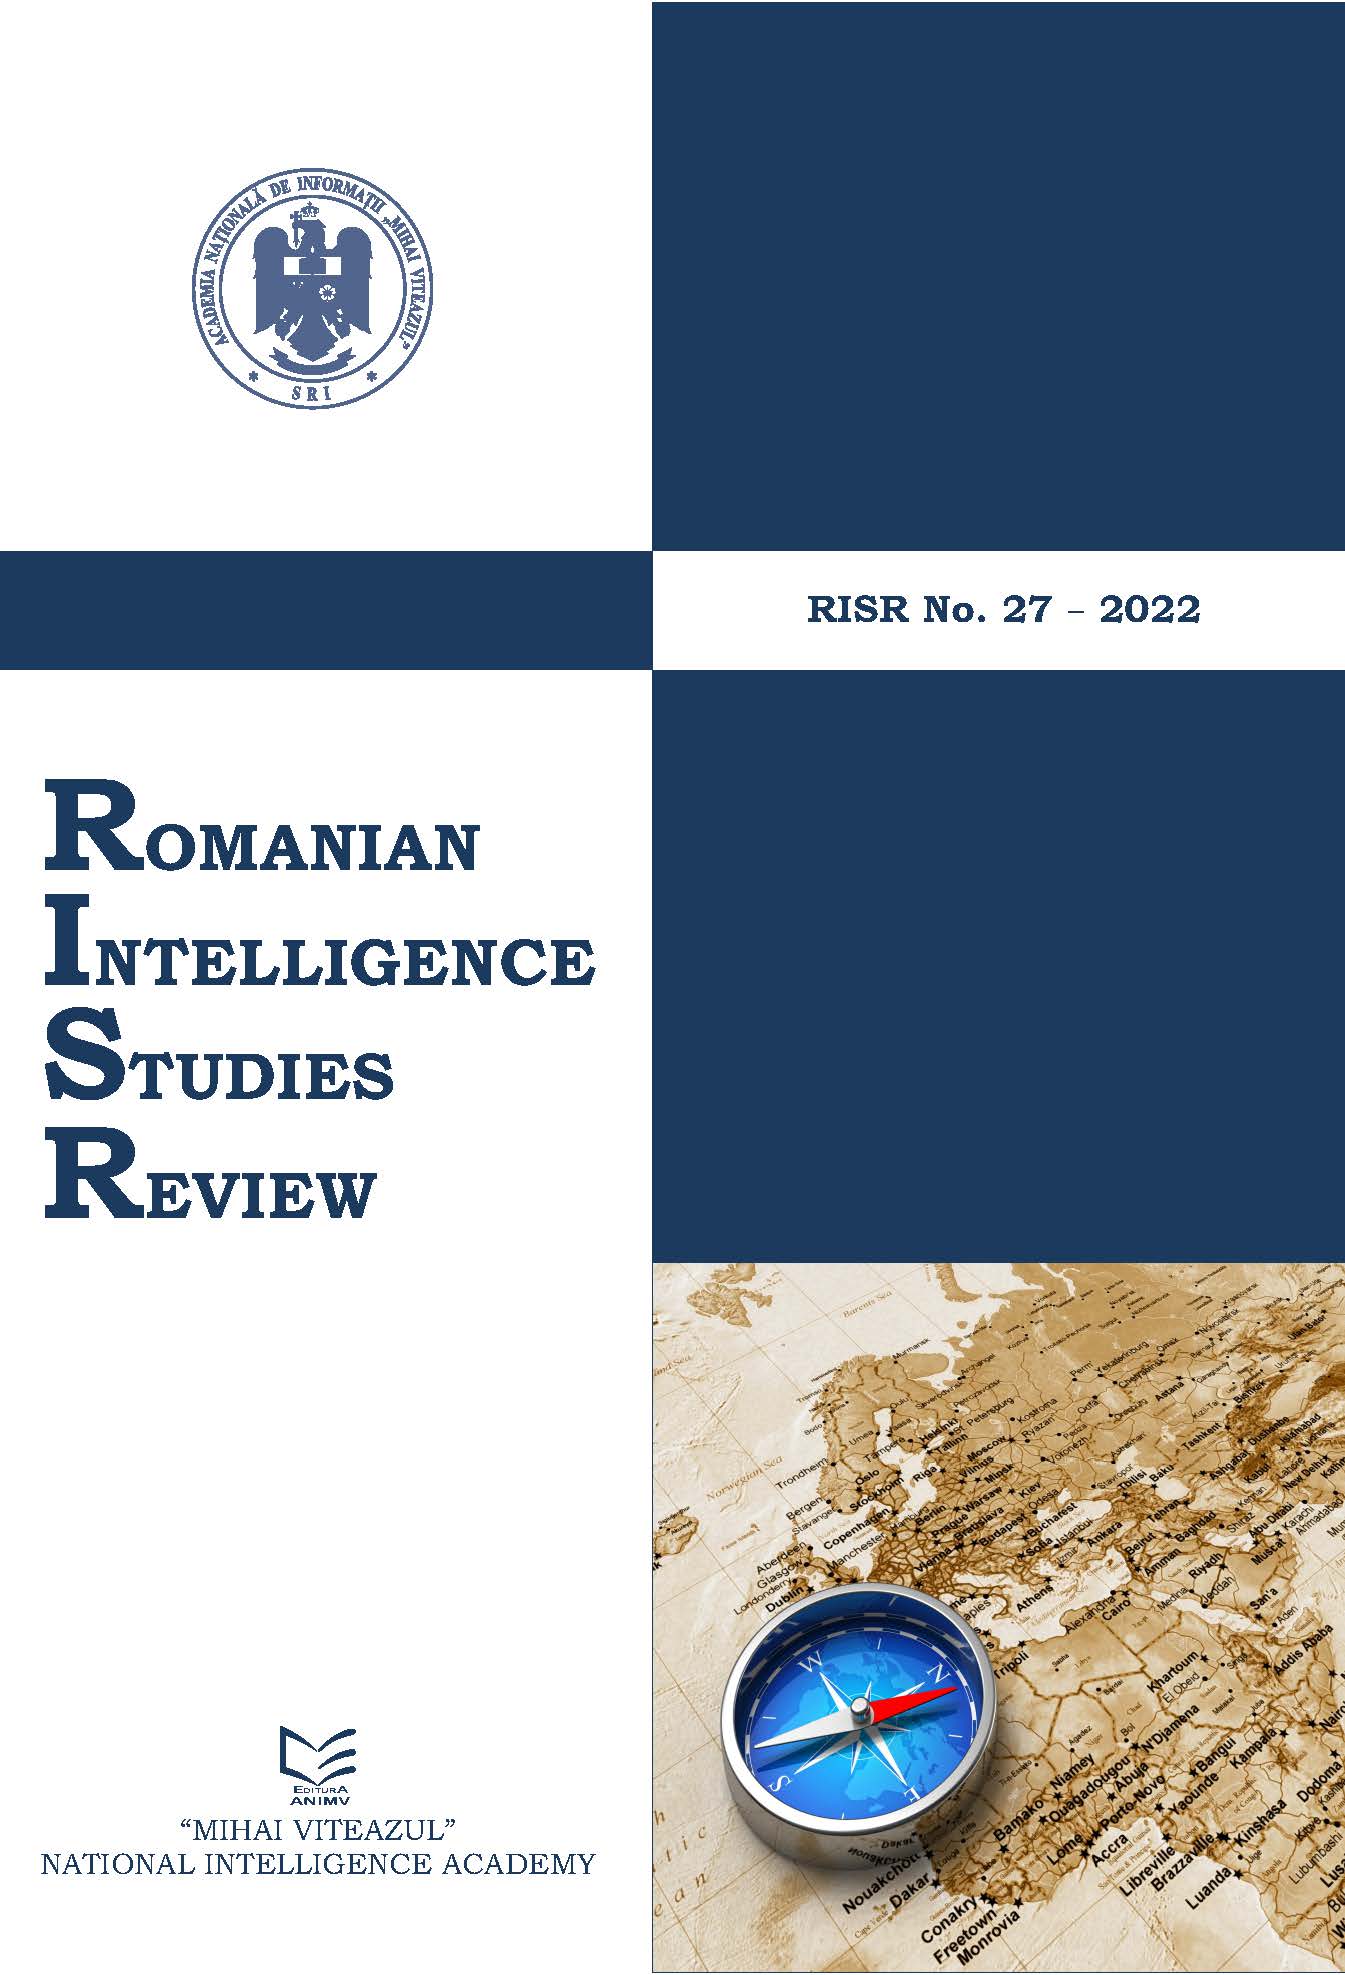 UNDERSTANDING THE IMPORTANCE OF EXPERT AND INDEPENDENT INTELLIGENCE OVERSIGHT IN LIGHT OF RECENT TECHNOLOGICAL ADVANCES IN DATA COLLECTION: A CASE STUDY OF THE UNITED KINGDOM